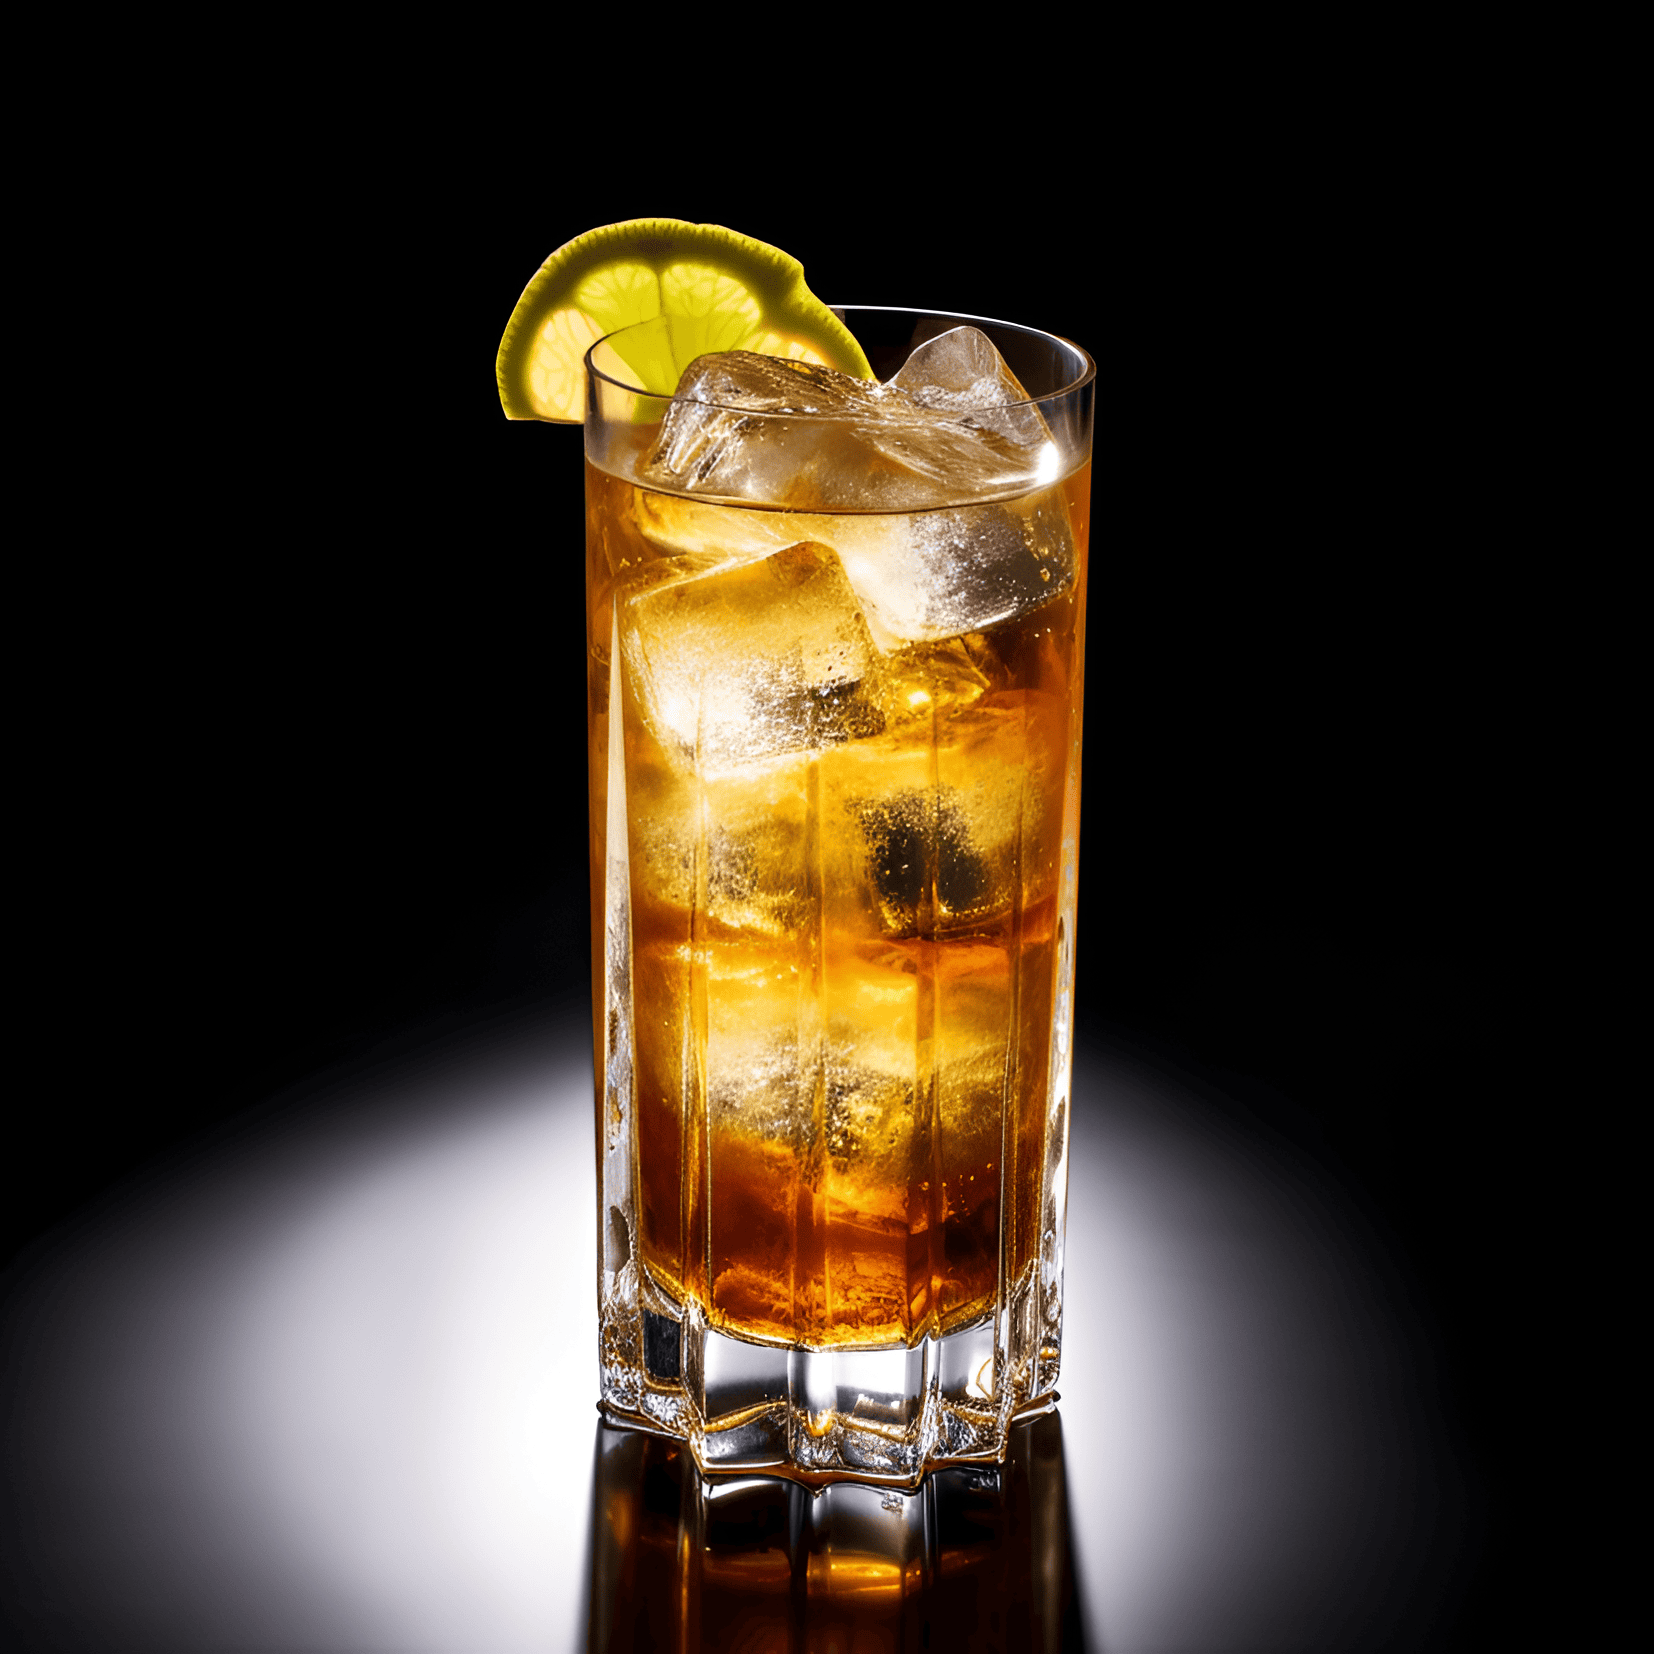 Cognac Highball Cocktail Recipe - The Cognac Highball is a smooth, refreshing, and slightly sweet cocktail with a hint of spice from the ginger ale. The rich, fruity flavors of the cognac are perfectly balanced by the effervescence of the ginger ale, creating a delightful and sophisticated drinking experience.